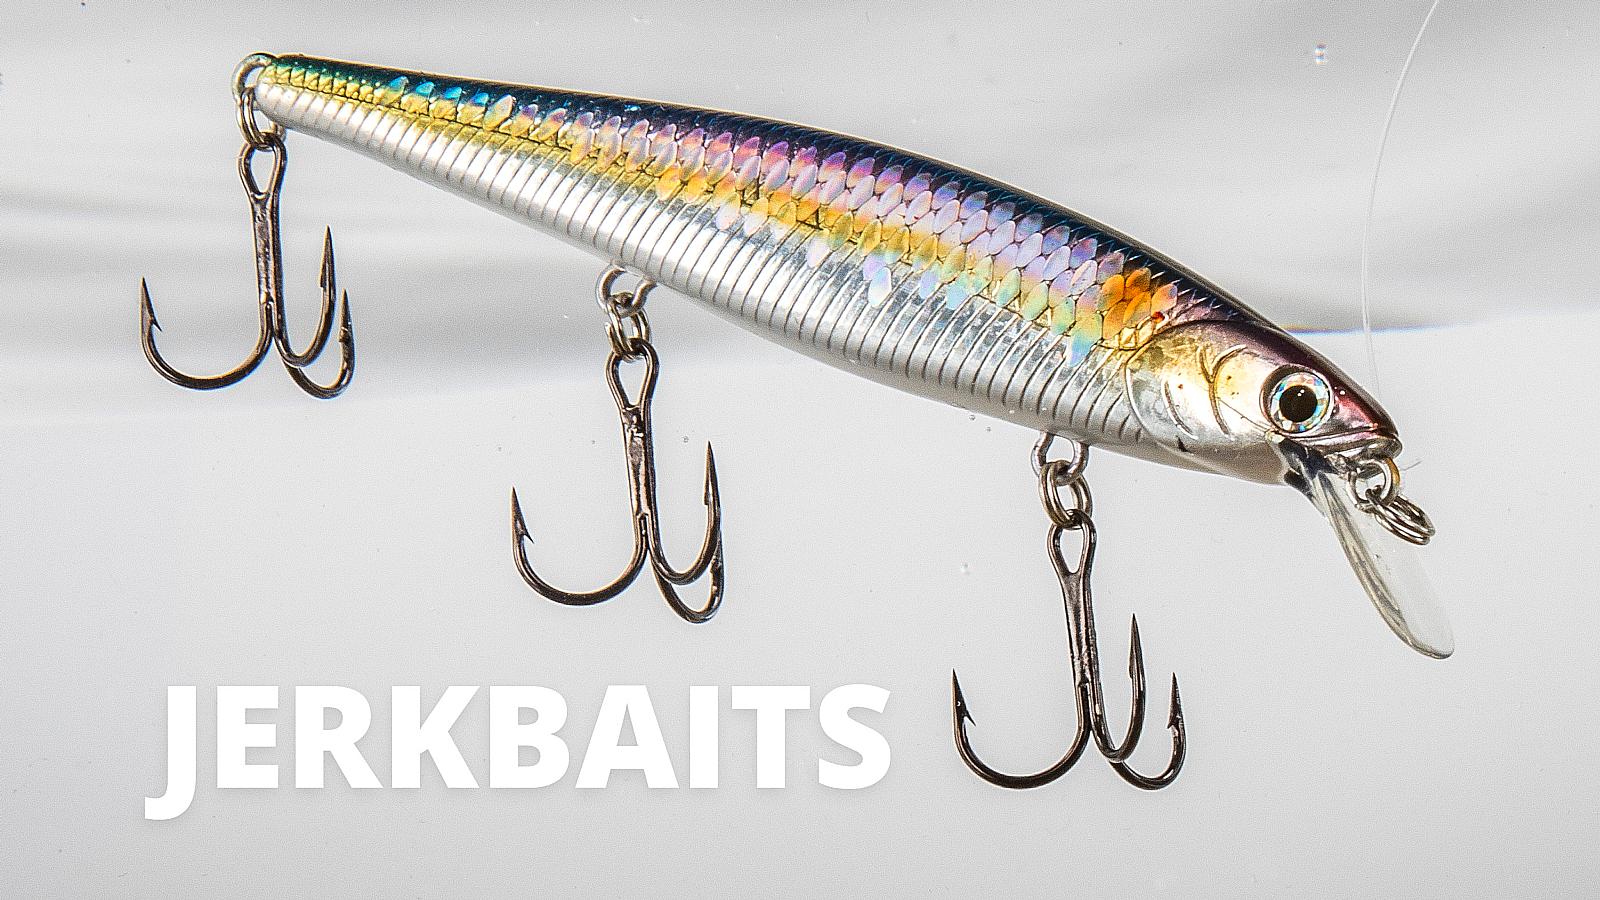 This JERKBAIT Will Double Your Catch In COLD WATER 